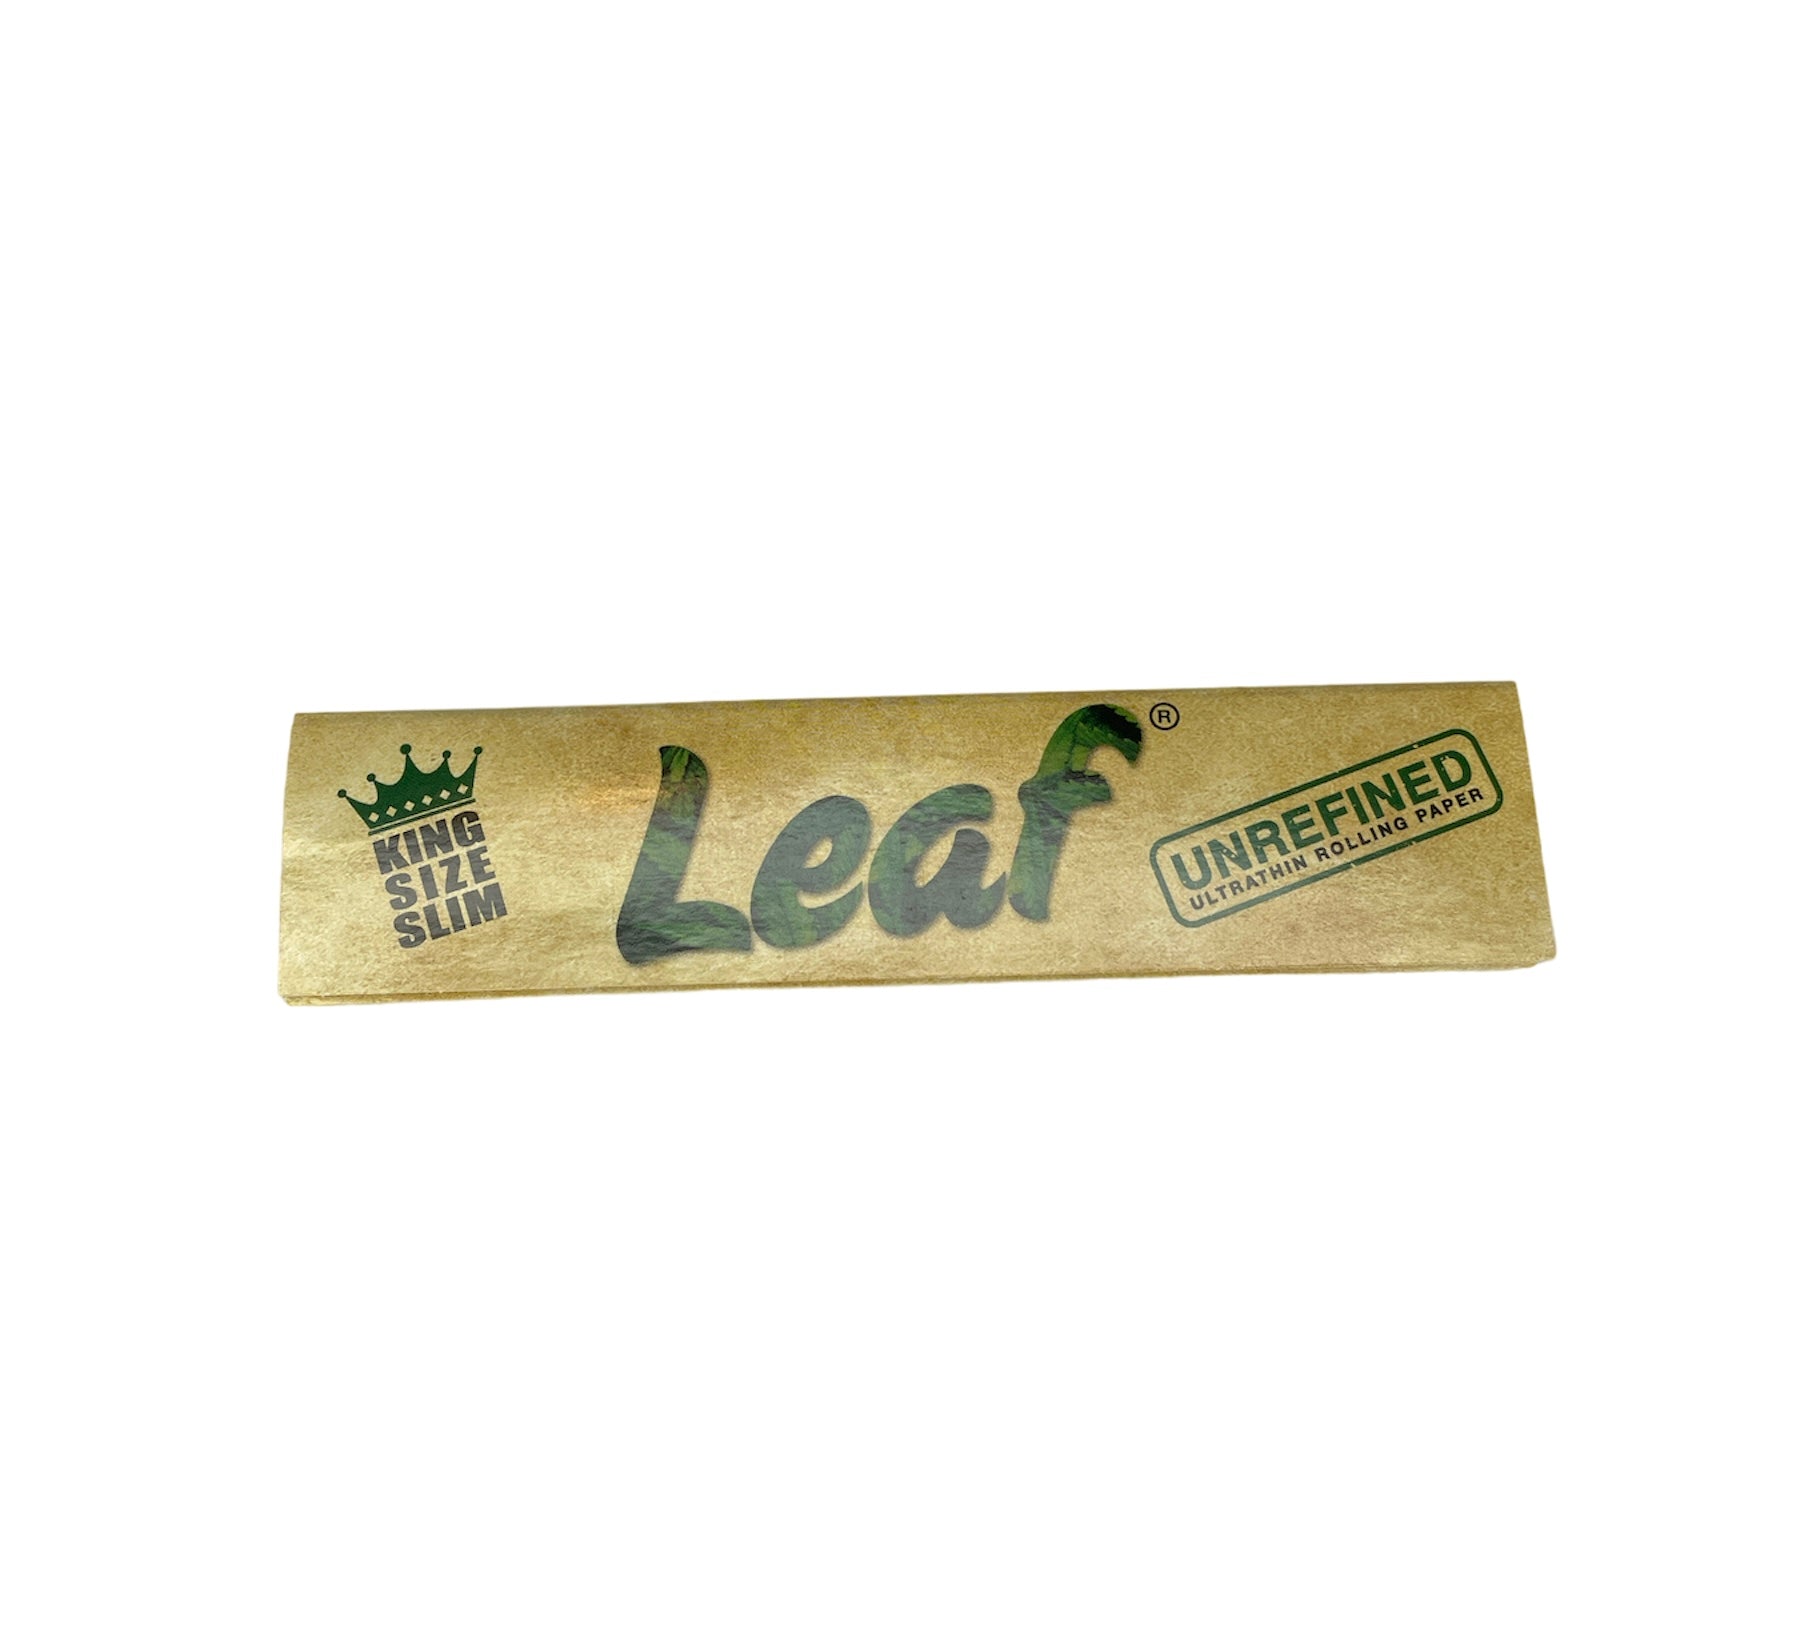 Leaf King Size Rolling Papers